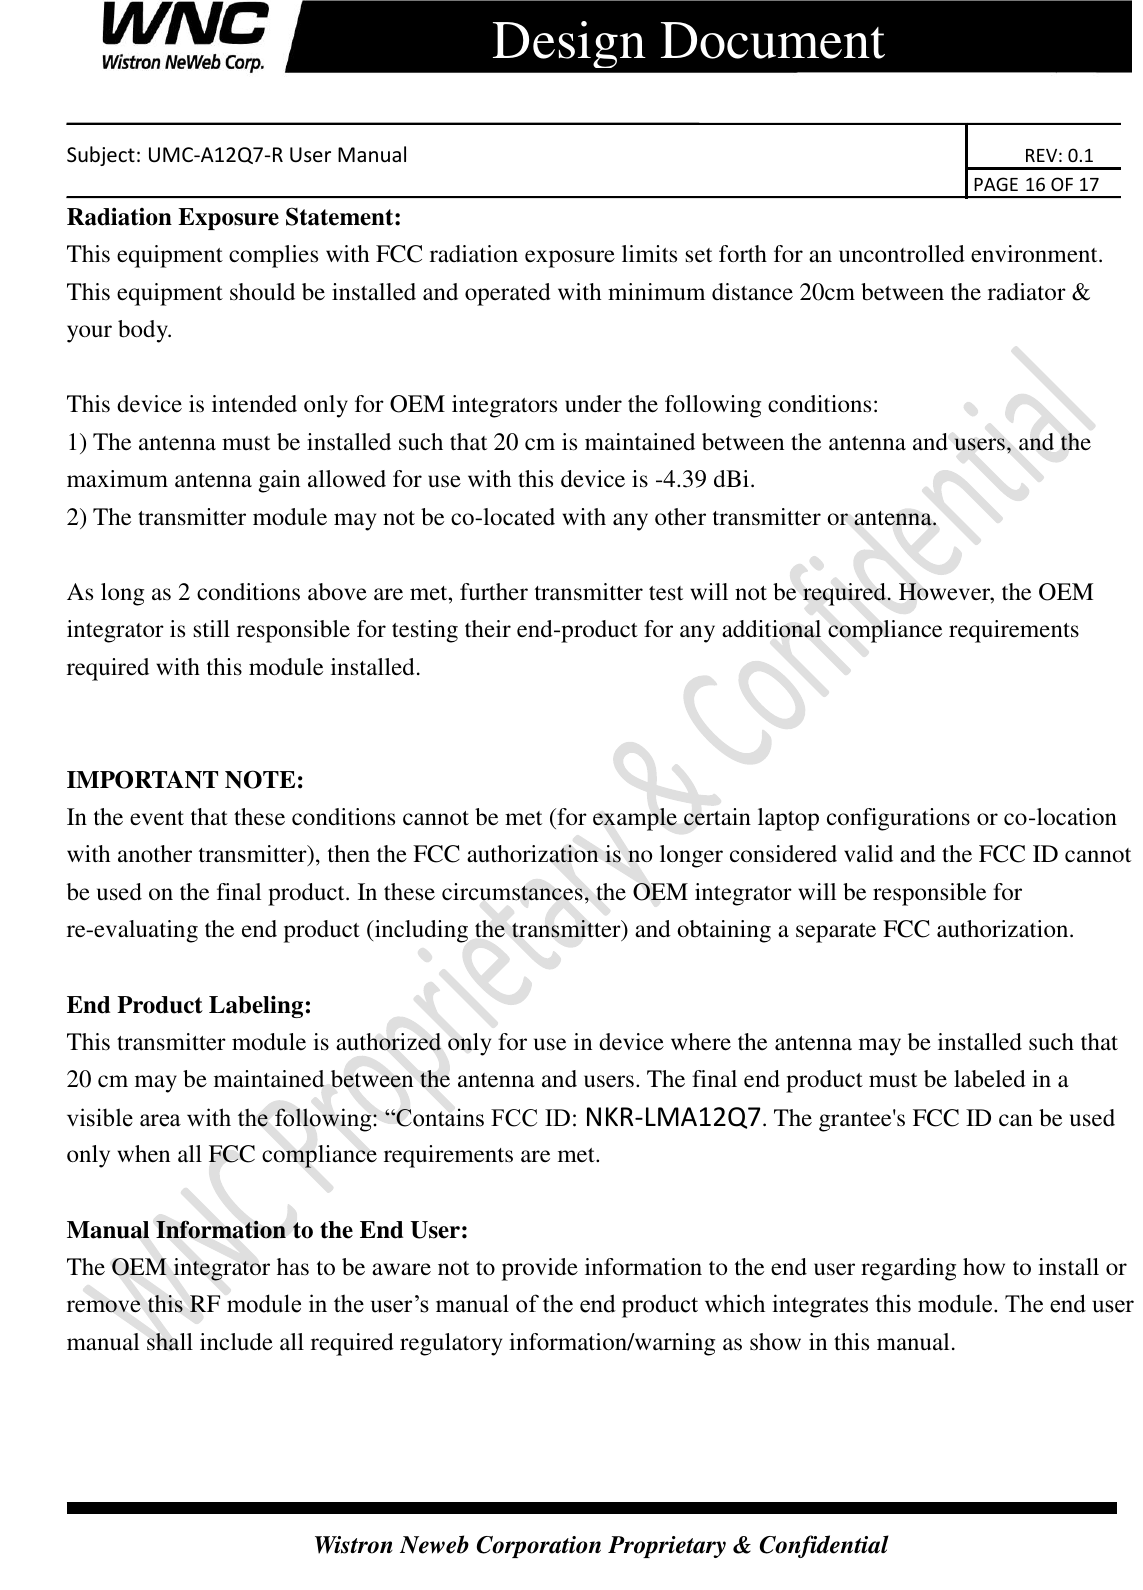    Subject: UMC-A12Q7-R User Manual                                                                      REV: 0.1                                                                                        PAGE 16 OF 17  Wistron Neweb Corporation Proprietary &amp; Confidential      Design Document Radiation Exposure Statement: This equipment complies with FCC radiation exposure limits set forth for an uncontrolled environment. This equipment should be installed and operated with minimum distance 20cm between the radiator &amp; your body.  This device is intended only for OEM integrators under the following conditions: 1) The antenna must be installed such that 20 cm is maintained between the antenna and users, and the maximum antenna gain allowed for use with this device is -4.39 dBi.   2) The transmitter module may not be co-located with any other transmitter or antenna.  As long as 2 conditions above are met, further transmitter test will not be required. However, the OEM integrator is still responsible for testing their end-product for any additional compliance requirements required with this module installed.   IMPORTANT NOTE:   In the event that these conditions cannot be met (for example certain laptop configurations or co-location with another transmitter), then the FCC authorization is no longer considered valid and the FCC ID cannot be used on the final product. In these circumstances, the OEM integrator will be responsible for re-evaluating the end product (including the transmitter) and obtaining a separate FCC authorization.  End Product Labeling: This transmitter module is authorized only for use in device where the antenna may be installed such that 20 cm may be maintained between the antenna and users. The final end product must be labeled in a visible area with the following: “Contains FCC ID: NKR-LMA12Q7. The grantee&apos;s FCC ID can be used only when all FCC compliance requirements are met.  Manual Information to the End User: The OEM integrator has to be aware not to provide information to the end user regarding how to install or remove this RF module in the user’s manual of the end product which integrates this module. The end user manual shall include all required regulatory information/warning as show in this manual. 